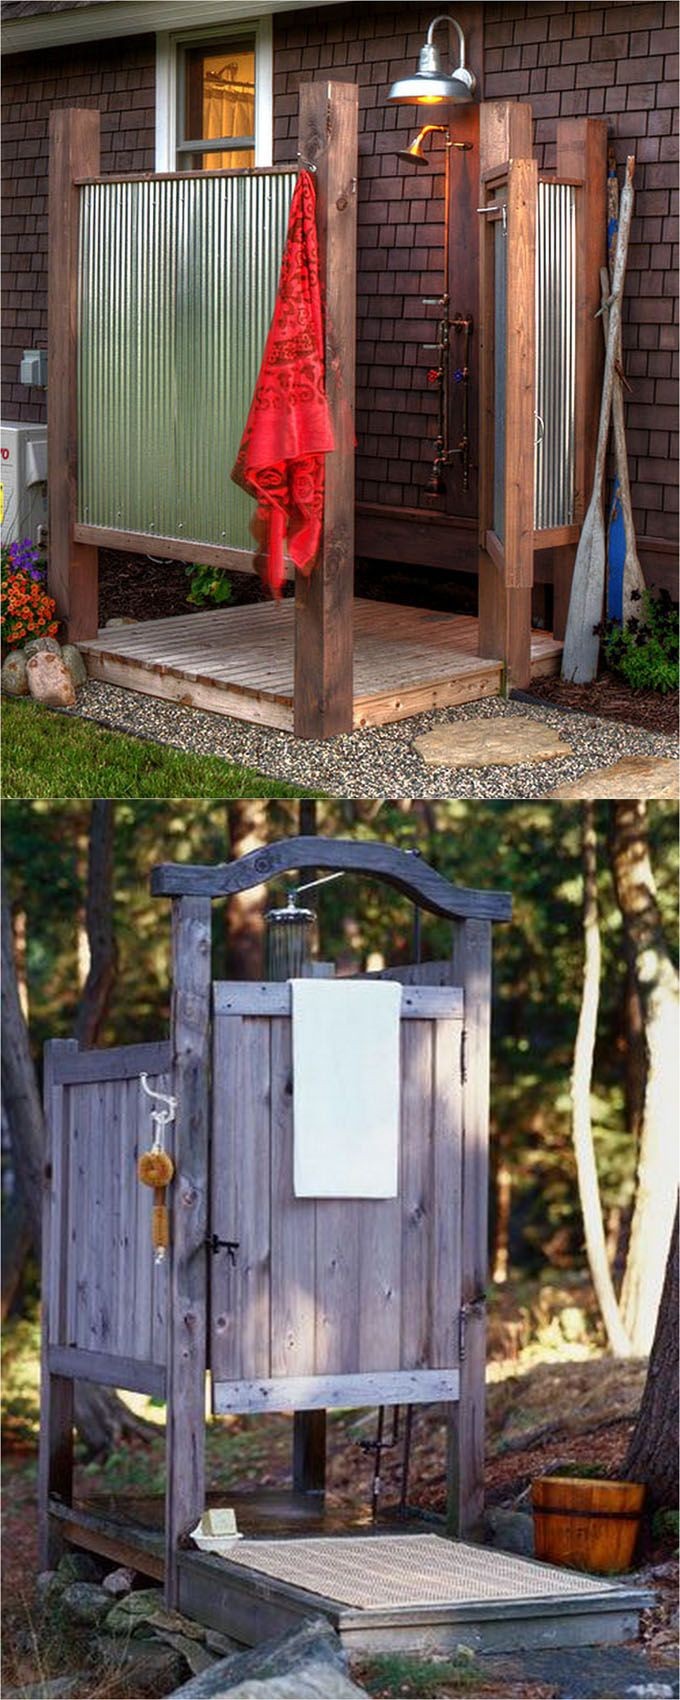 32 beautiful DIY outdoor showers how to build enclosures with simple materials best outdoor shower fixtures creative designs and more